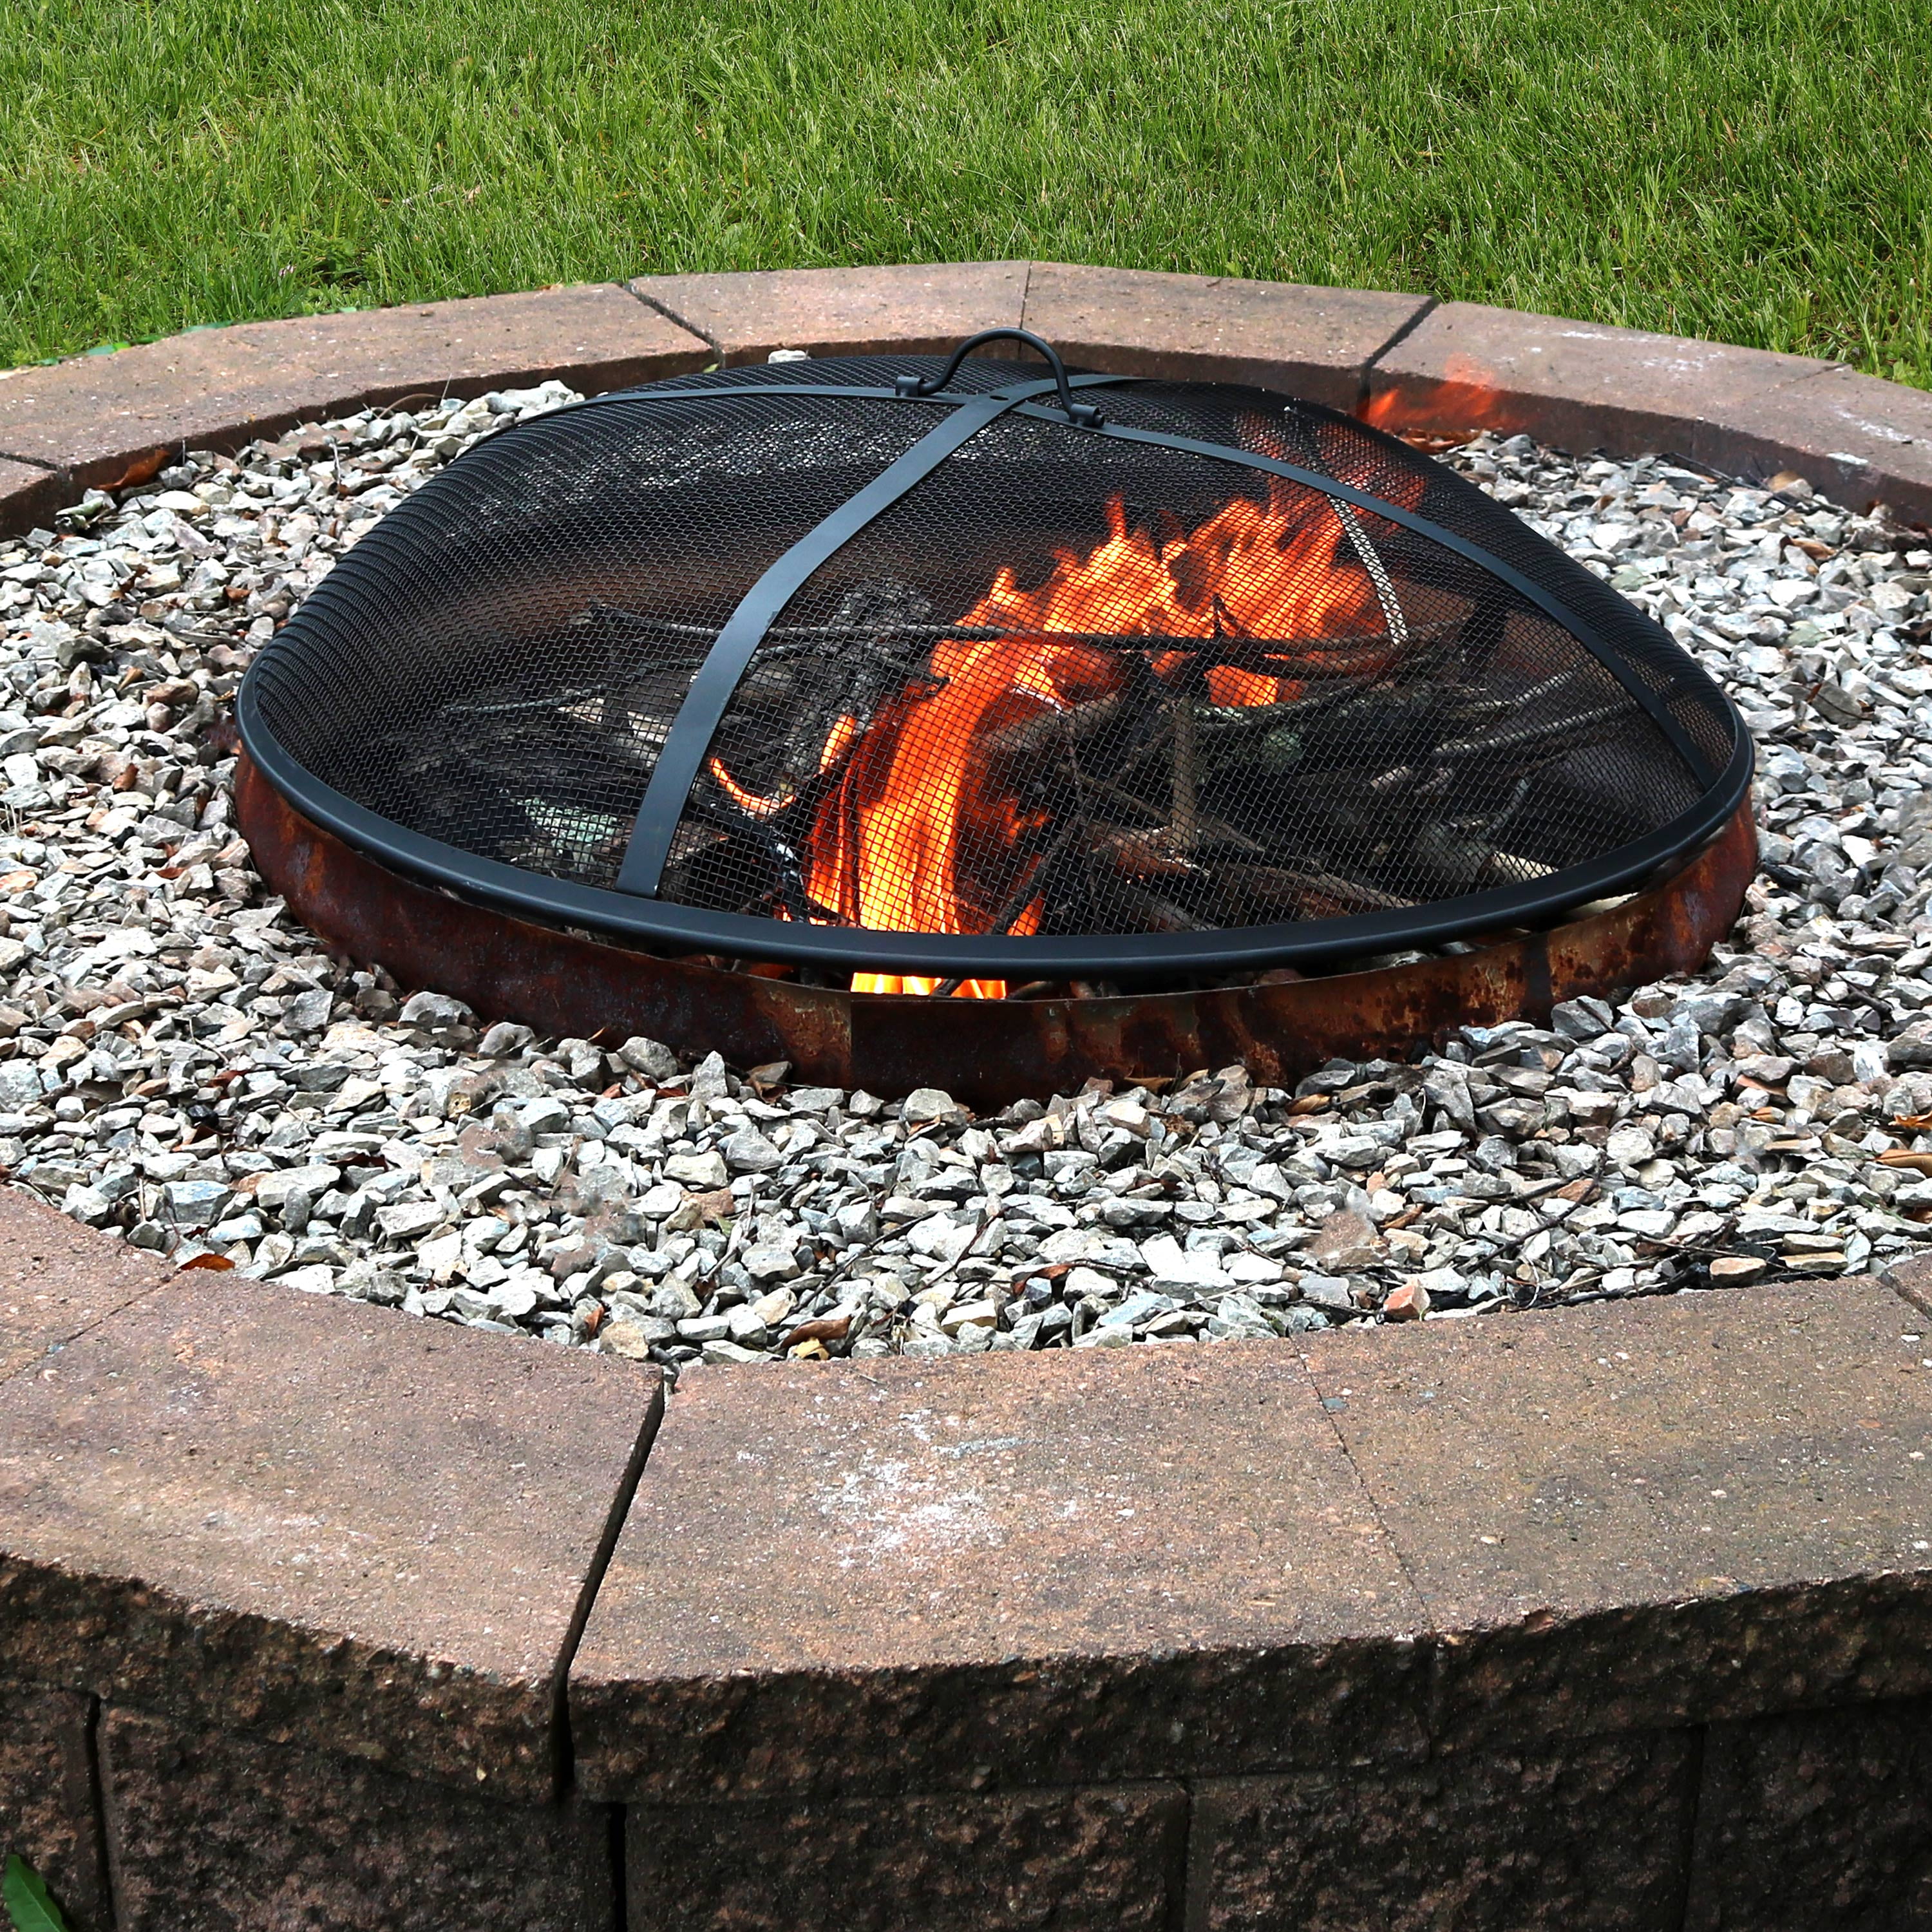 Replacement Bowl For Fire Pit, 30 Inch Fire Pit Bowl Replacement